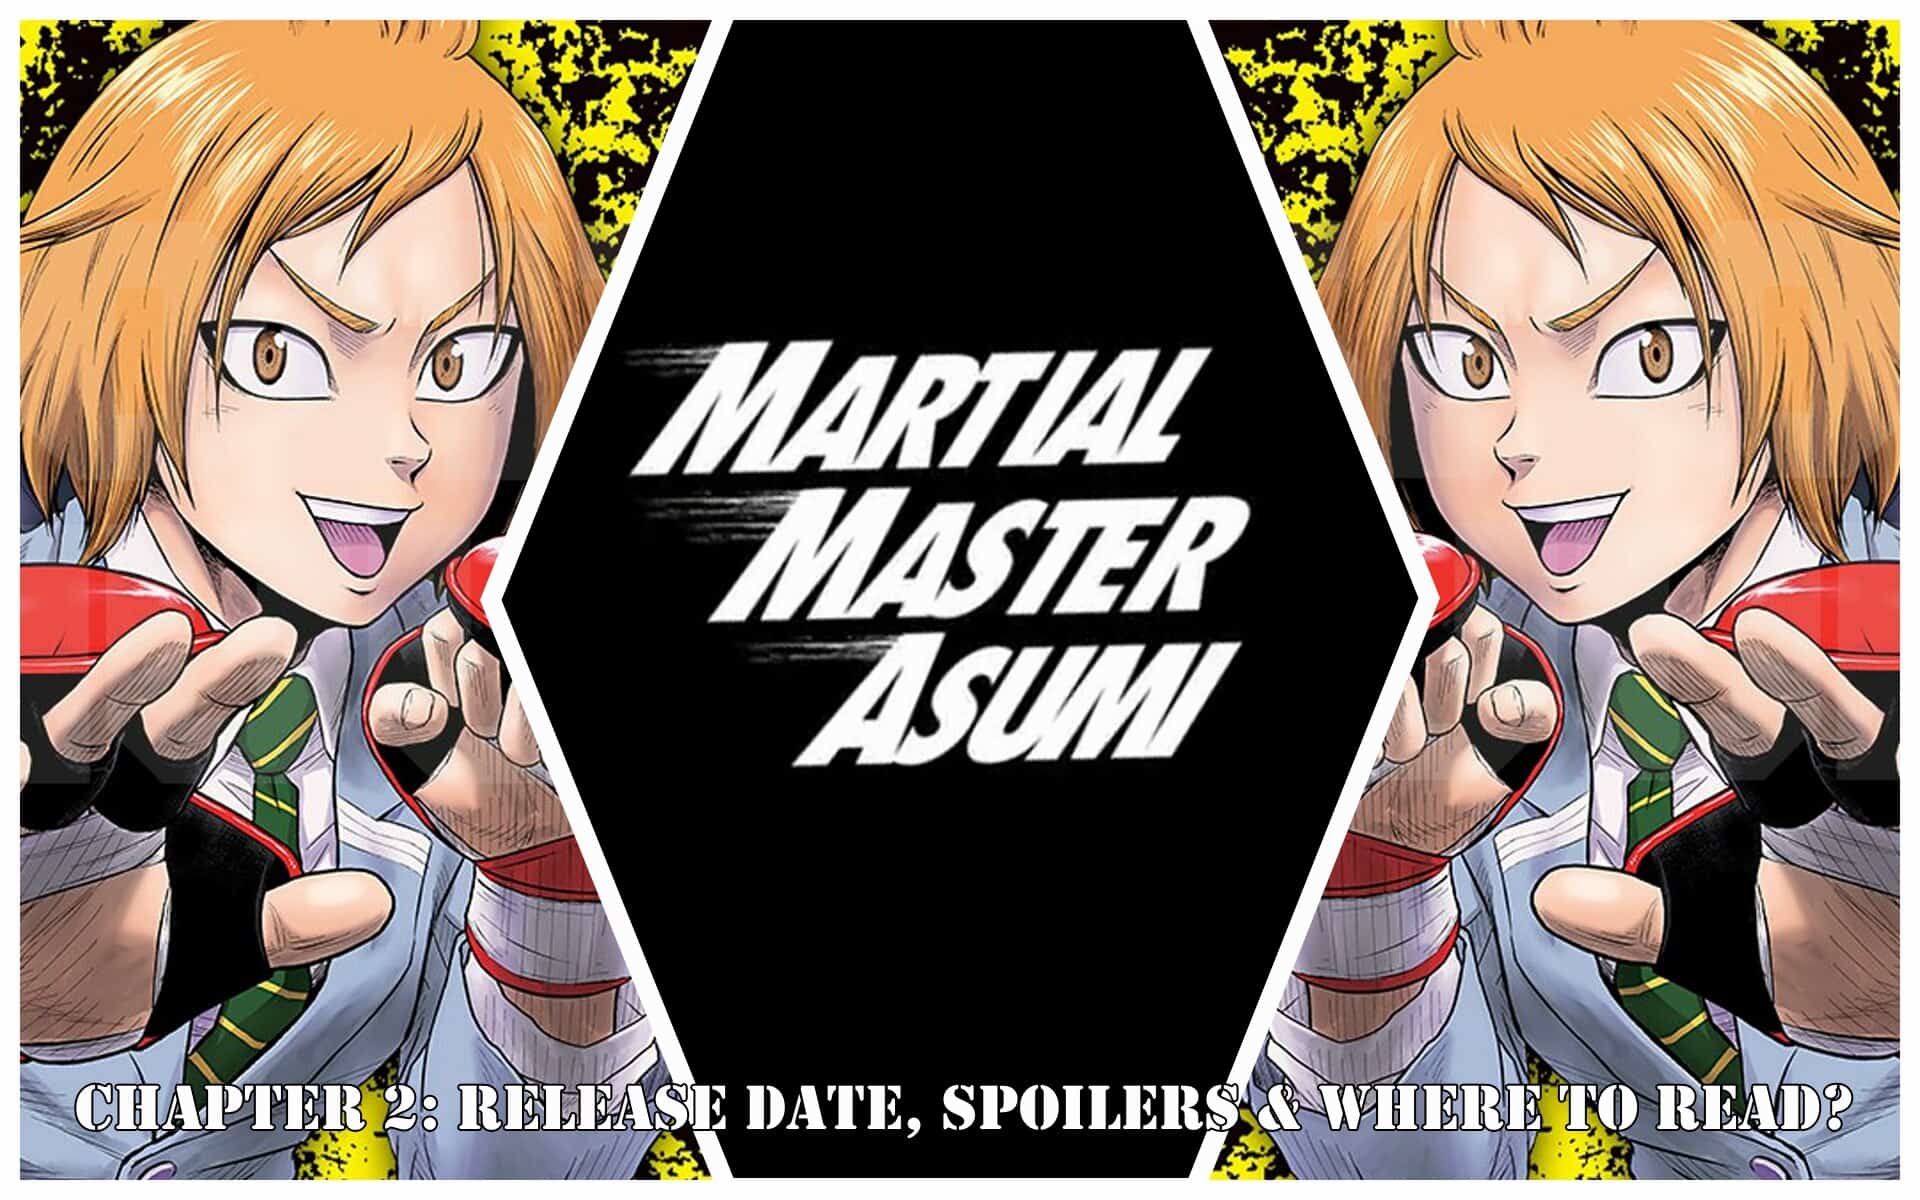 Martial Master Asumi Chapter 2: Release Date & Spoiler